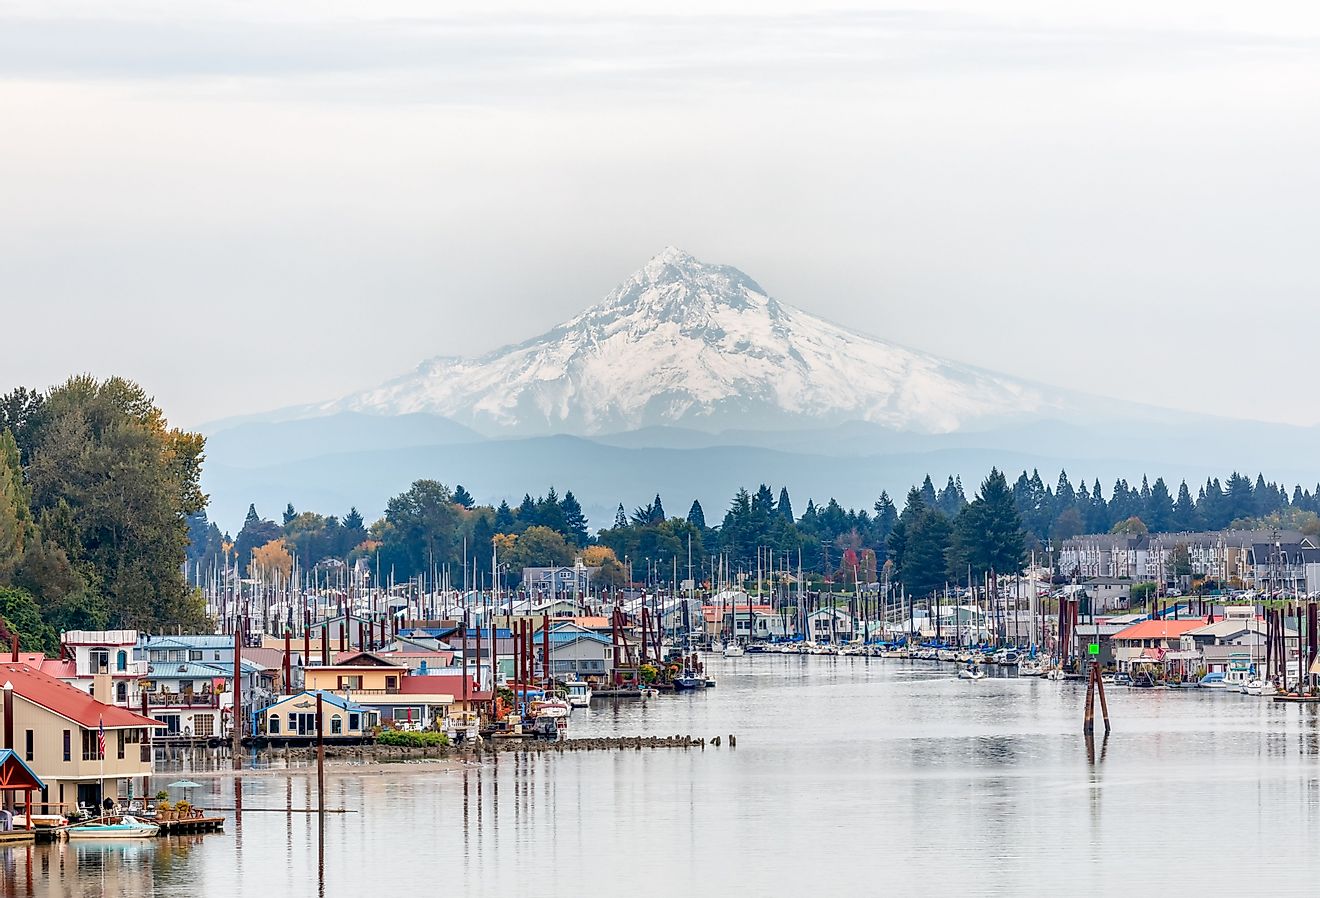 View of Mt. Hood and Portland Marina floating boat houses in Oregon. Image credit Paula Cobleigh via Shutterstock.